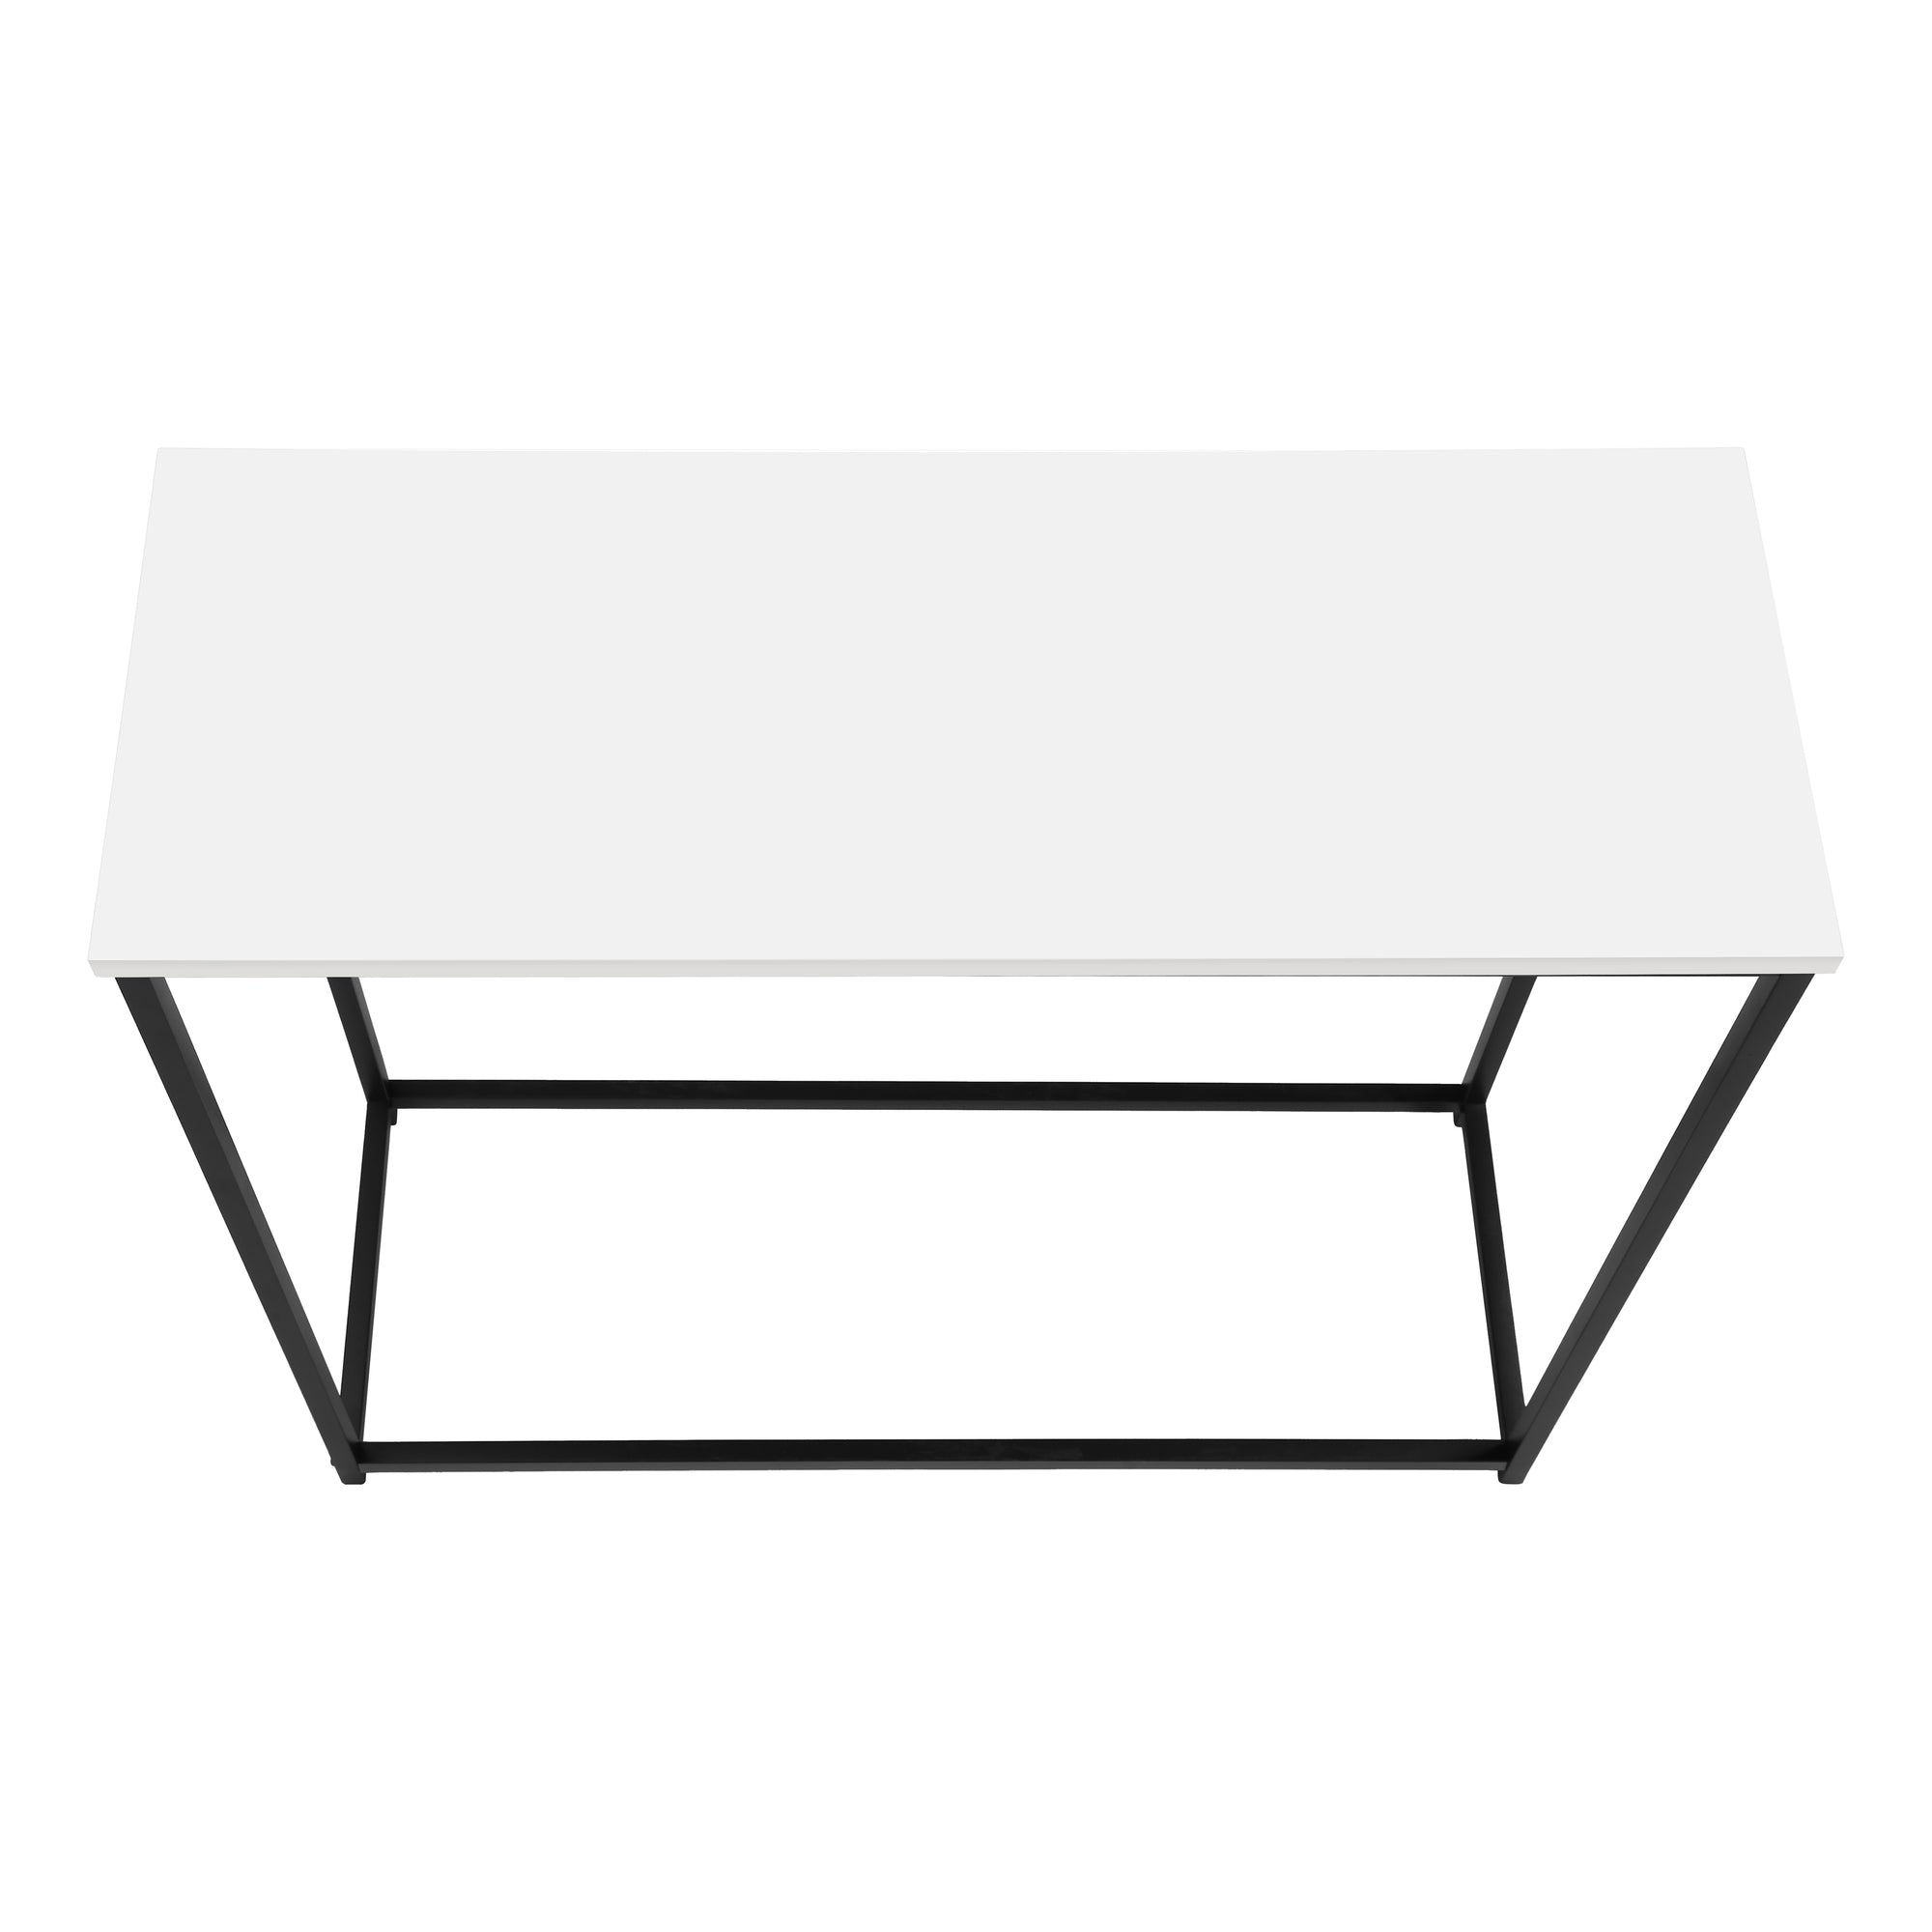 I 2252 - ACCENT TABLE - 32"L / WHITE / BLACK METAL CONSOLE BY MONARCH SPECIALTIES INC